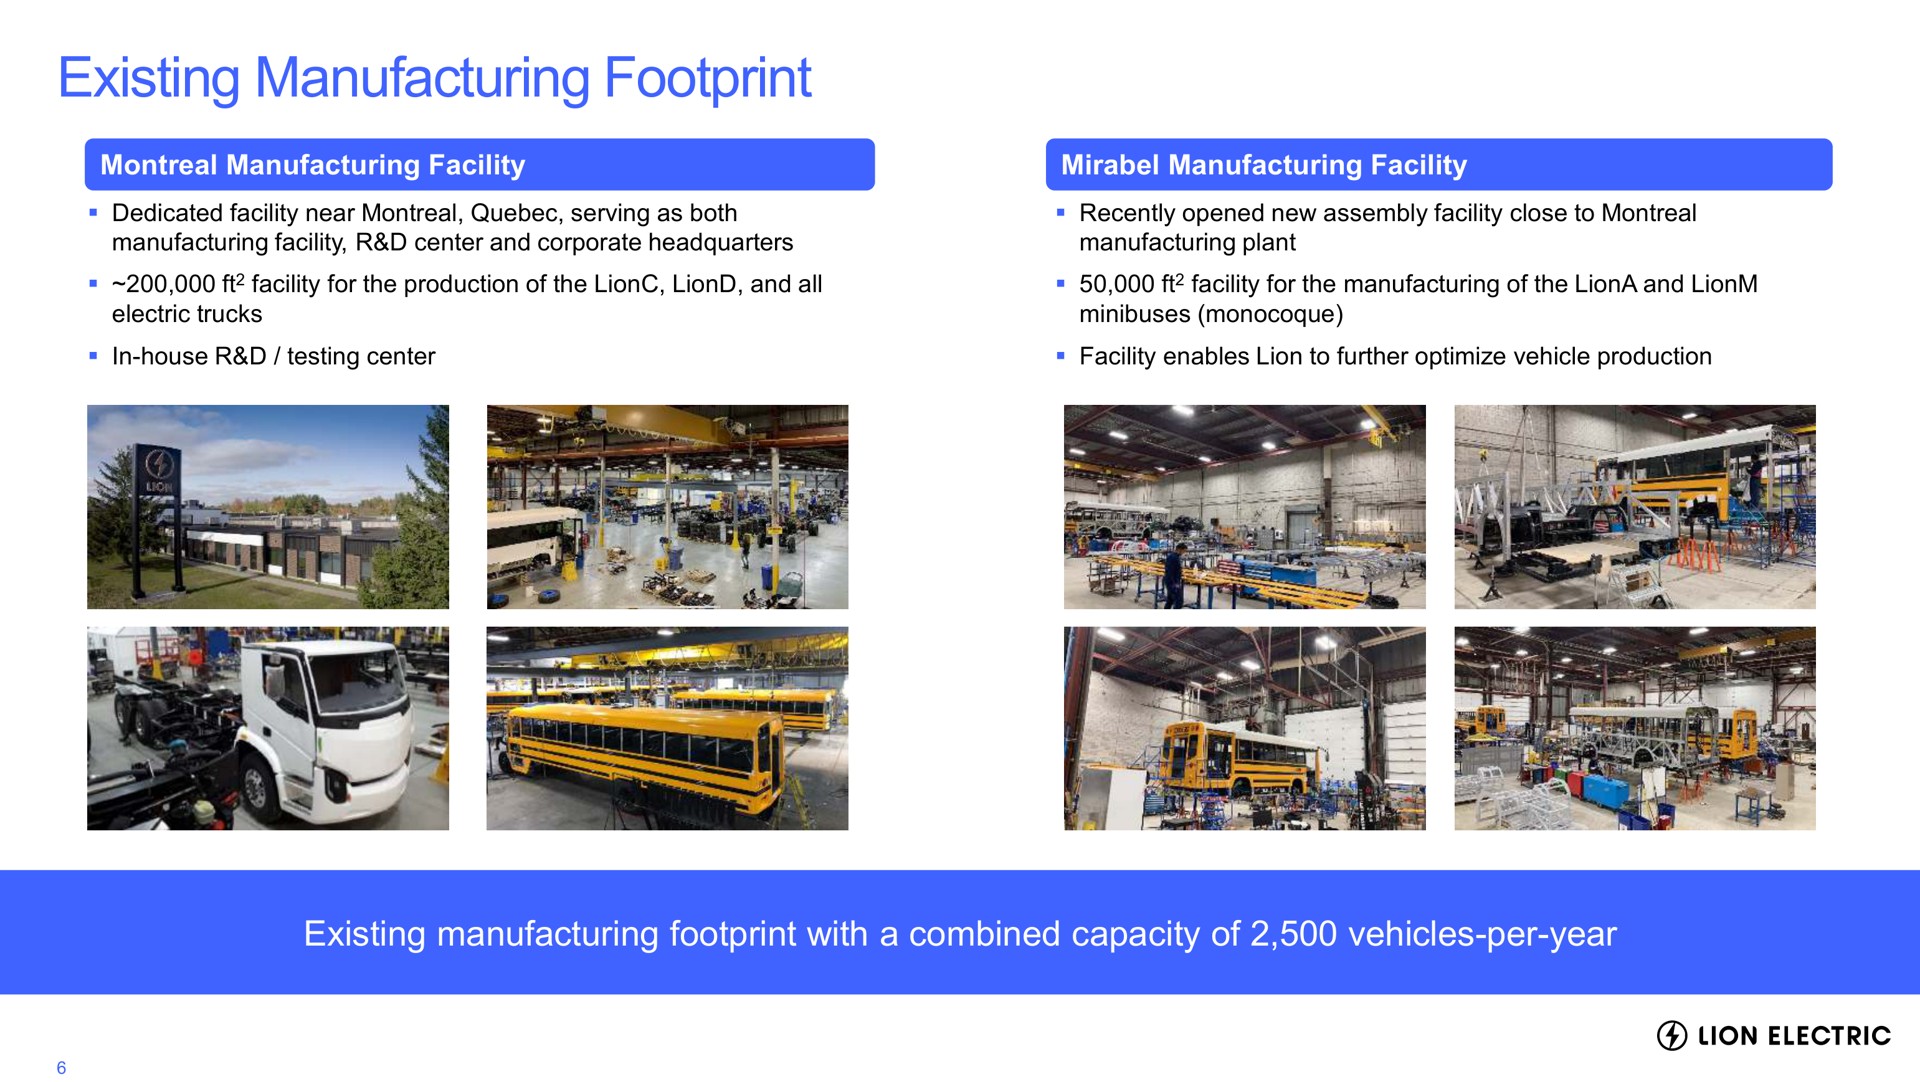 existing manufacturing footprint existing manufacturing footprint with a combined capacity of vehicles per year lion electric | Lion Electric